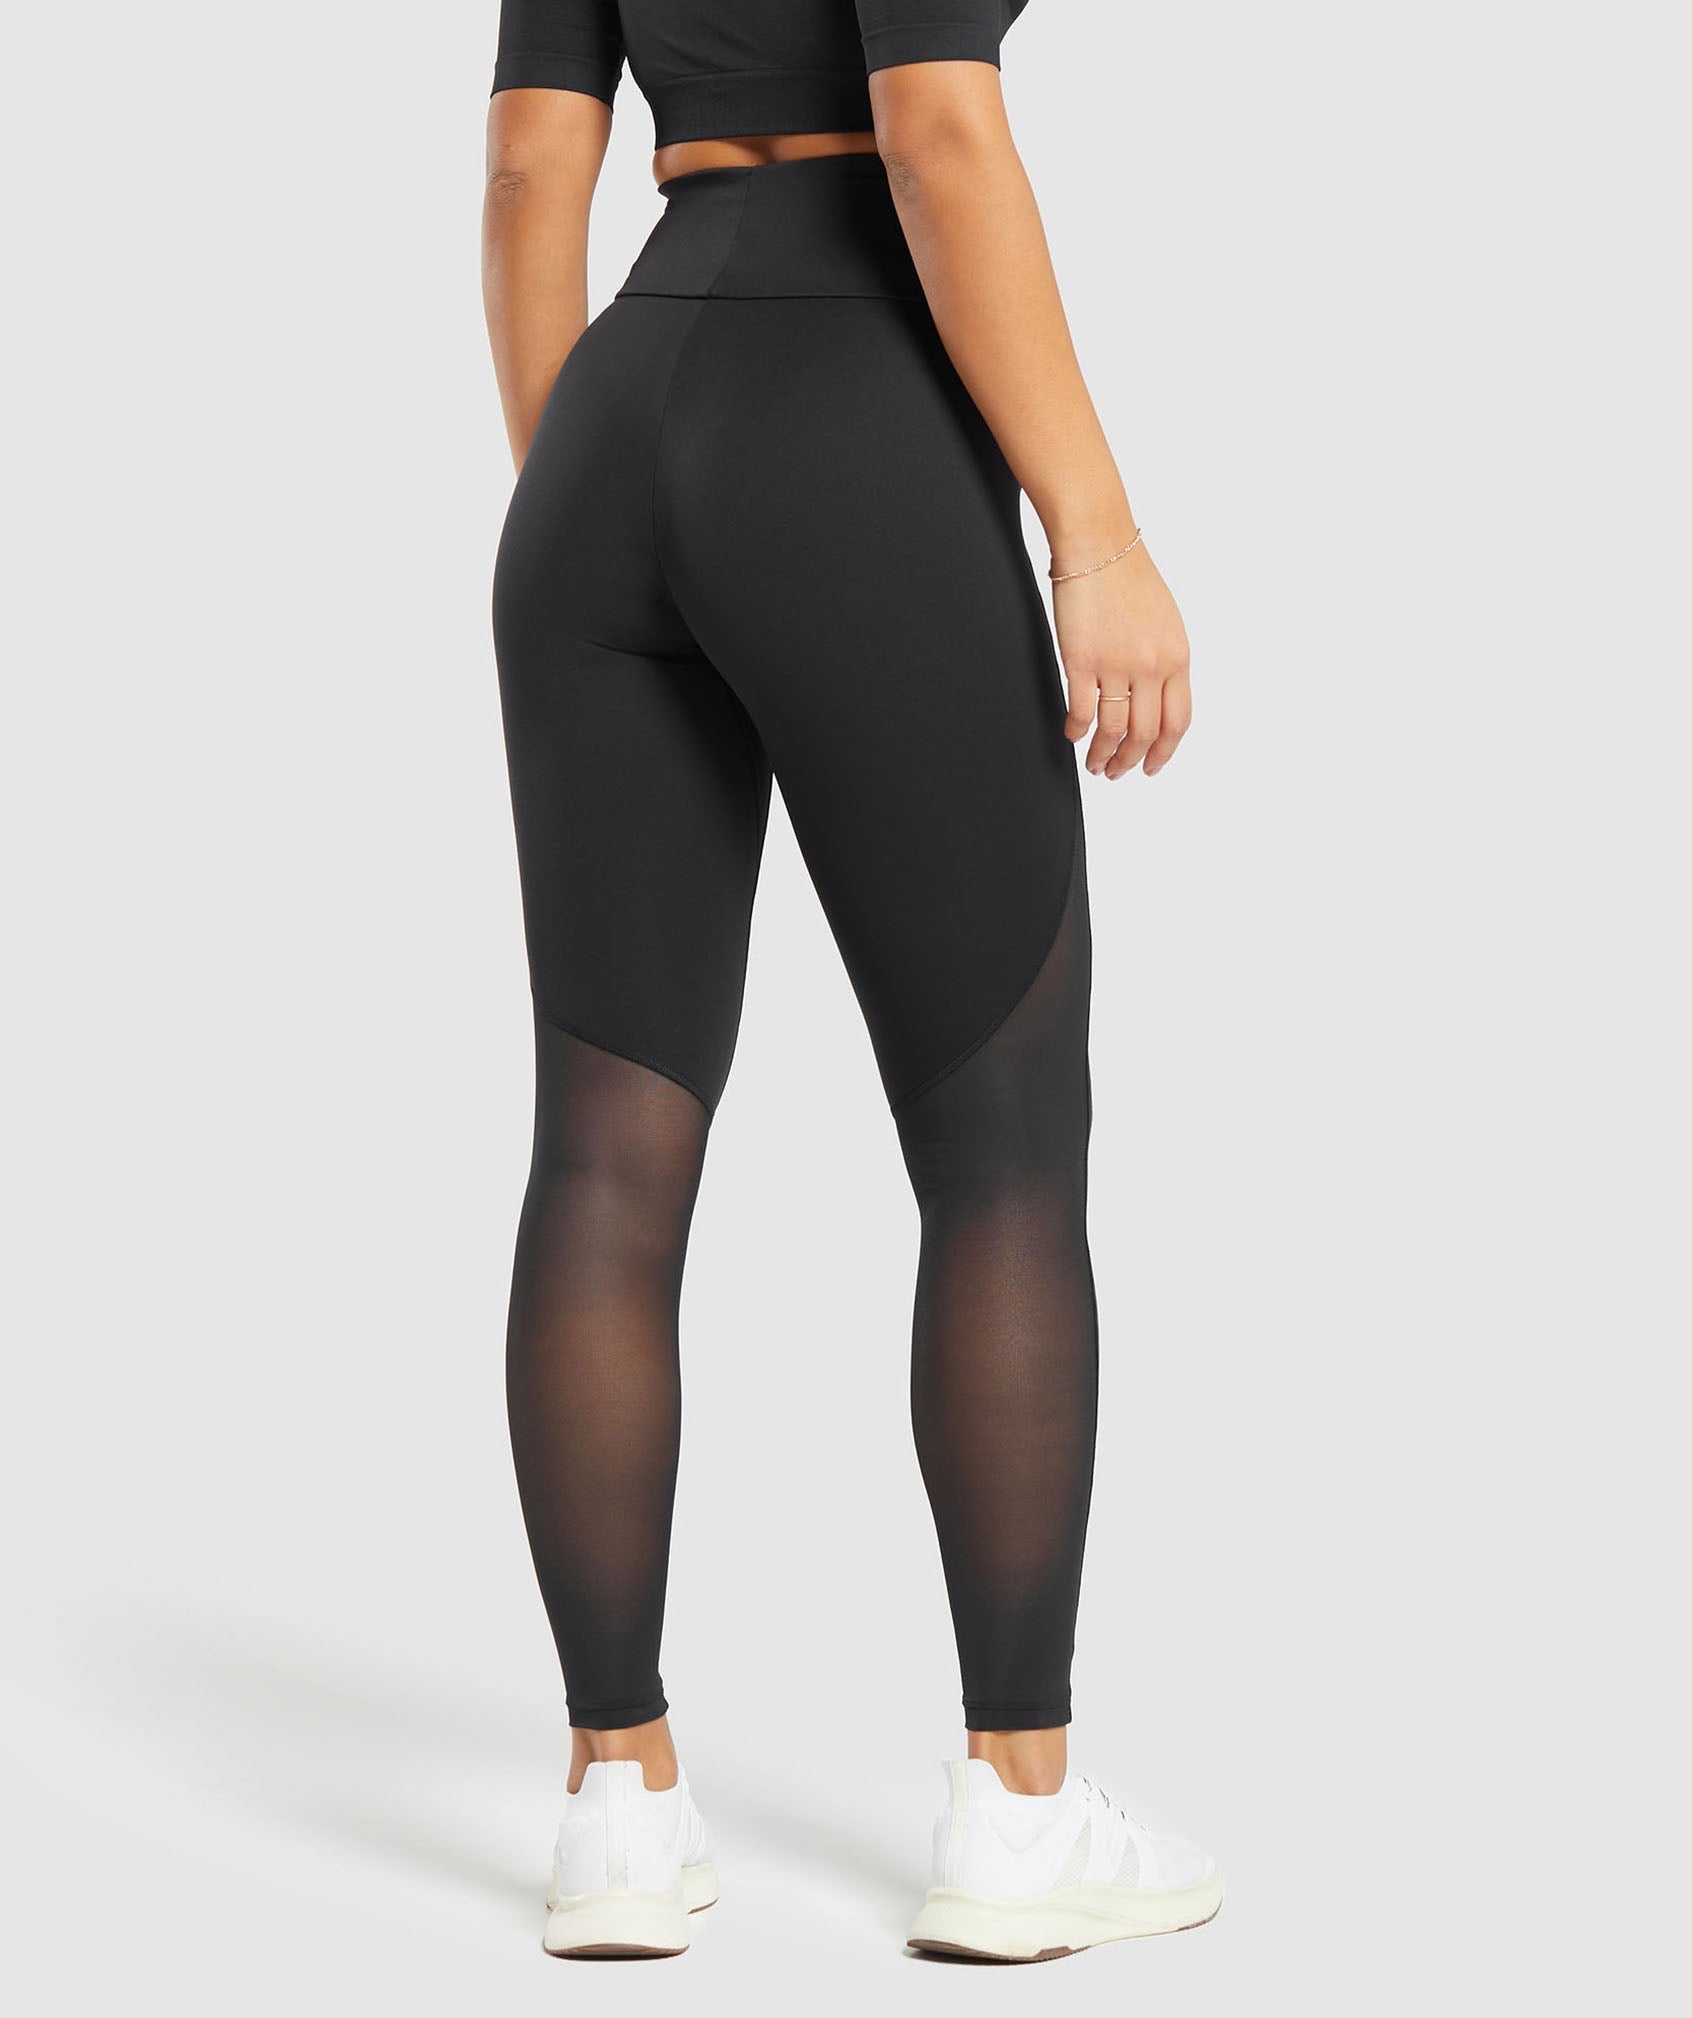 Gymshark Geo Mesh Leggings - Dark Ruby  Workout attire, Workout clothes,  Fitness fashion